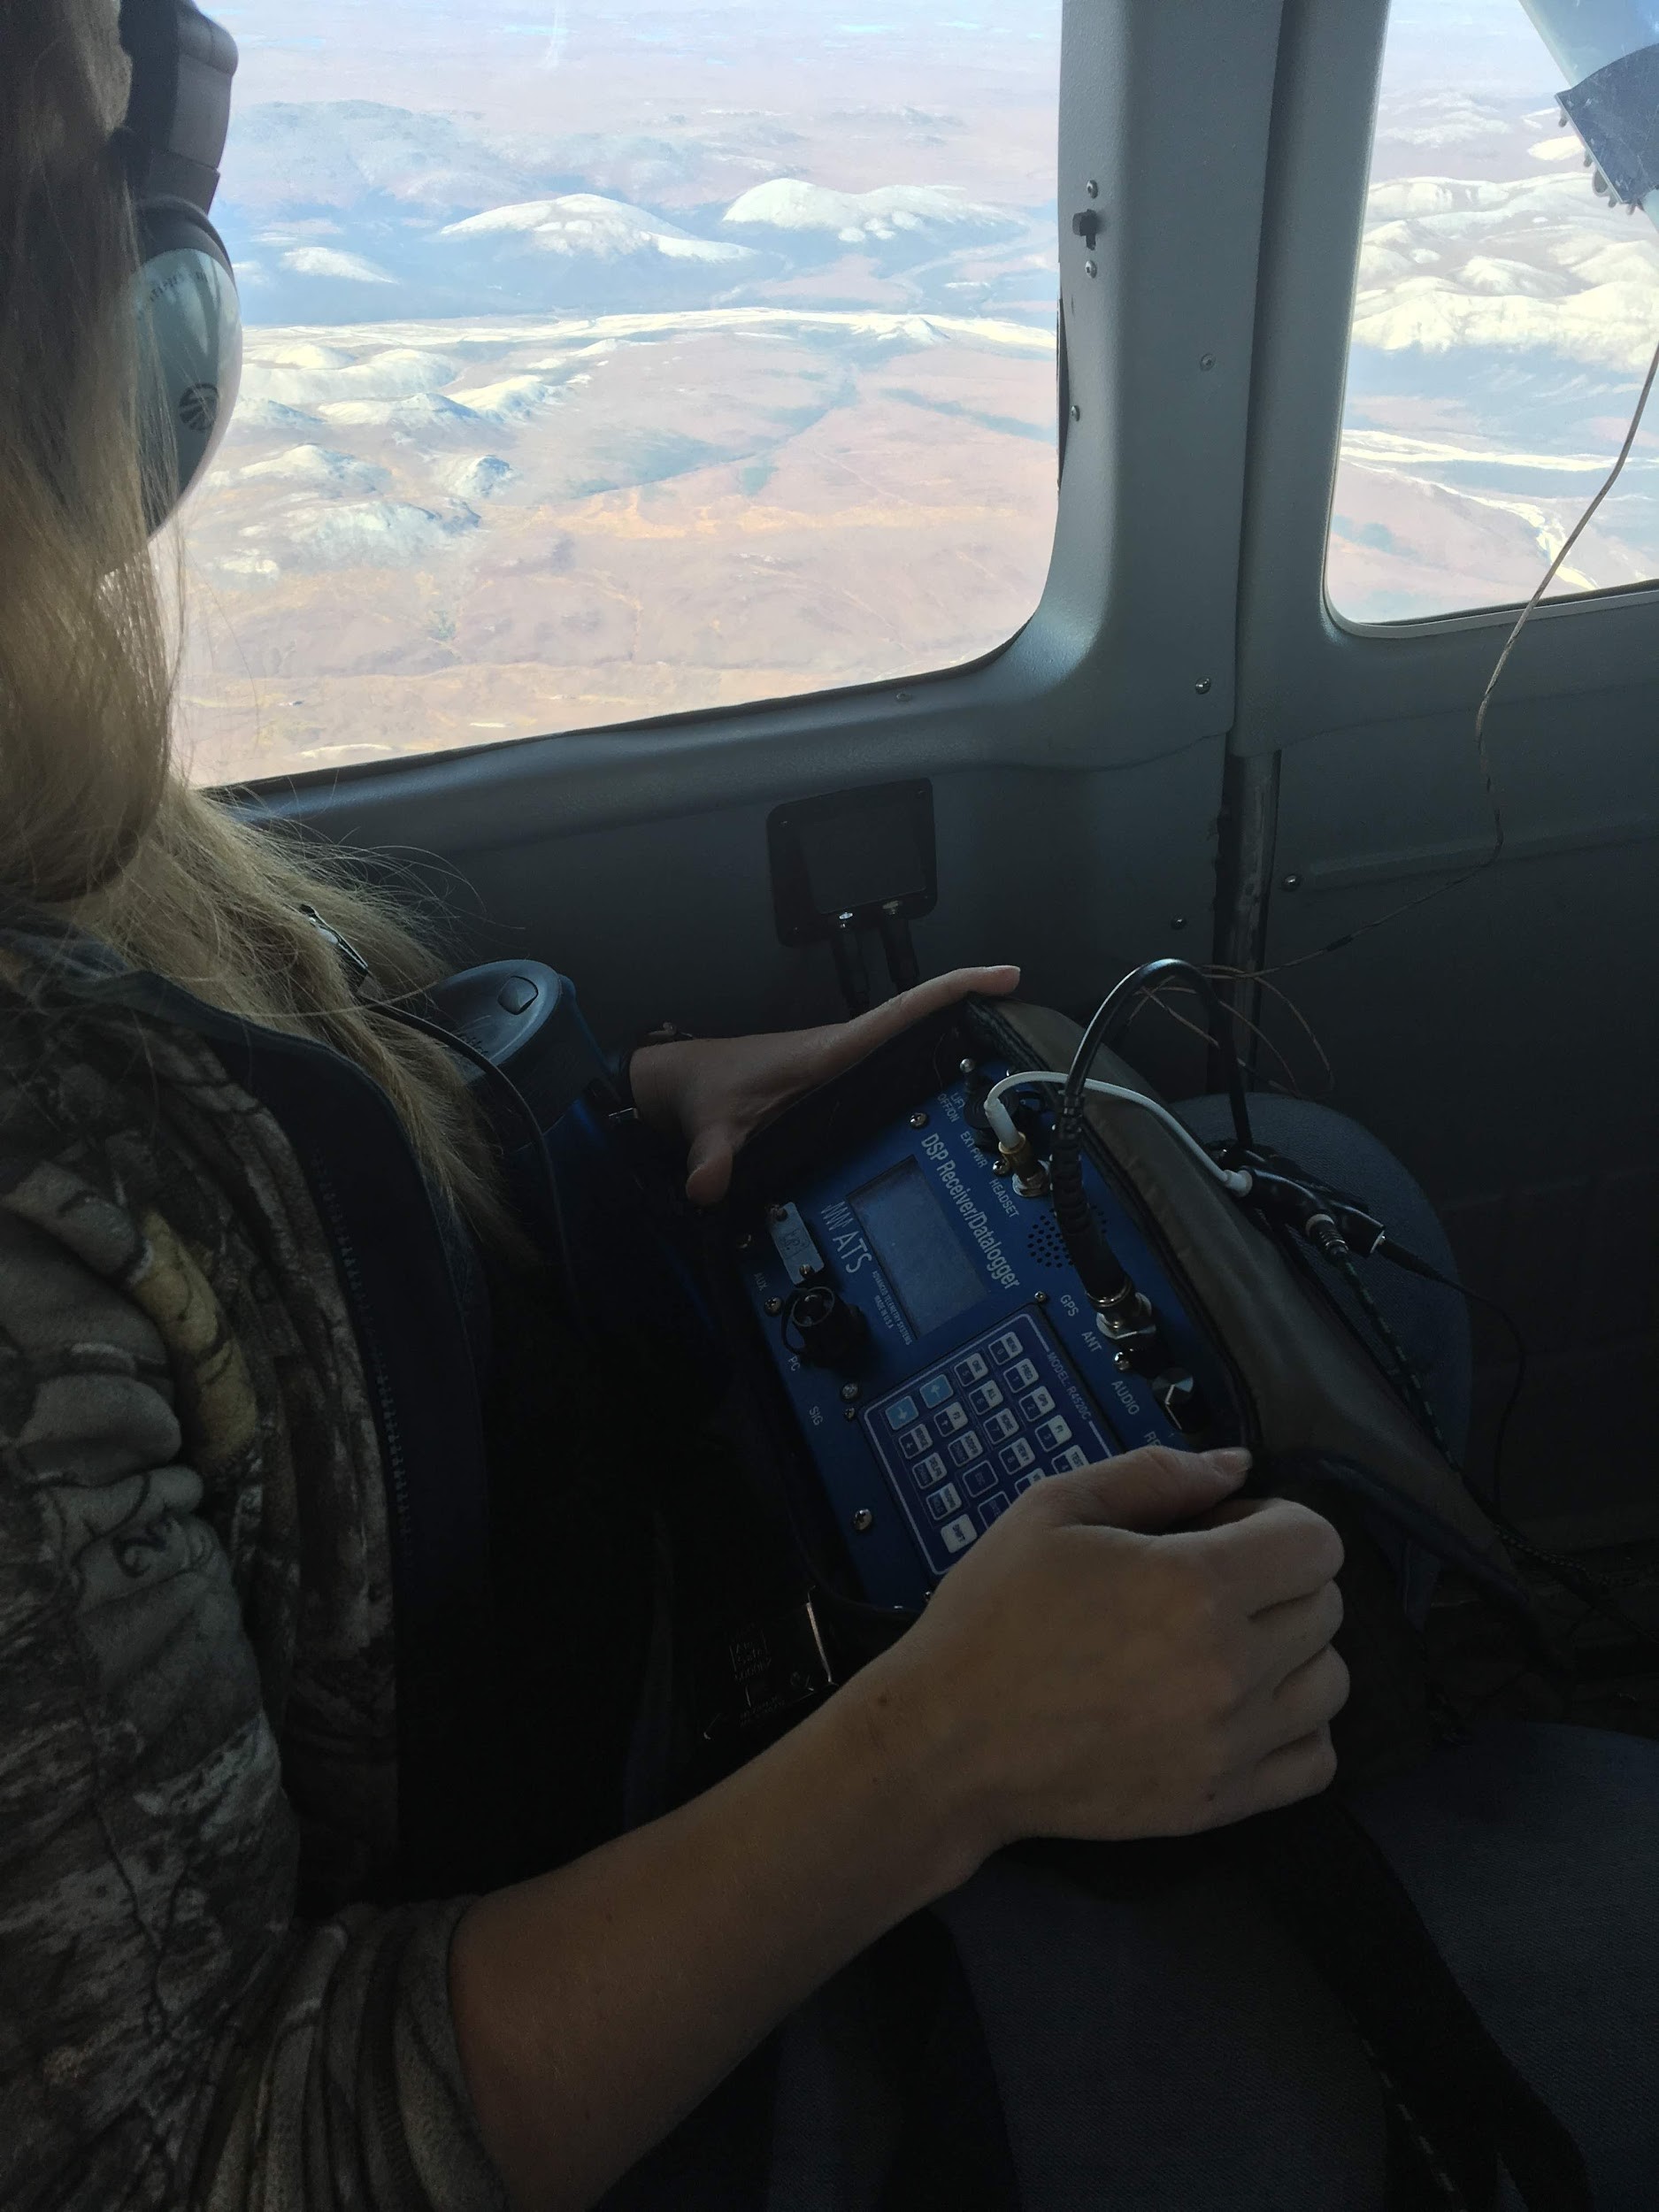 Girl using telemetry equipment and staring out the plane window at the tundra below